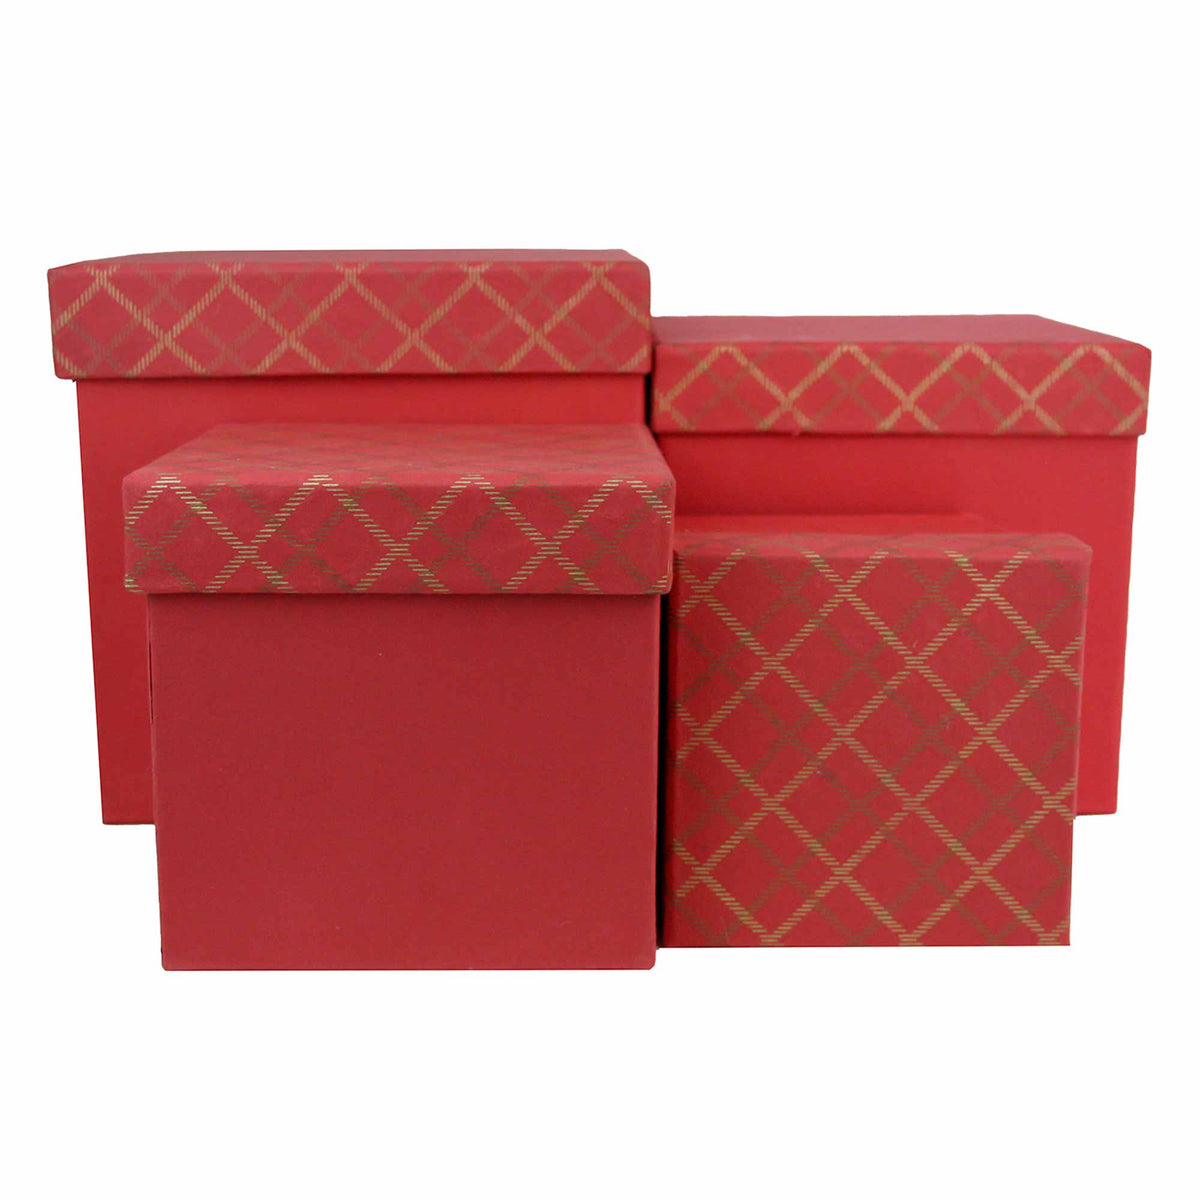 Set of 4 Handmade Red Chequered Gift Boxes